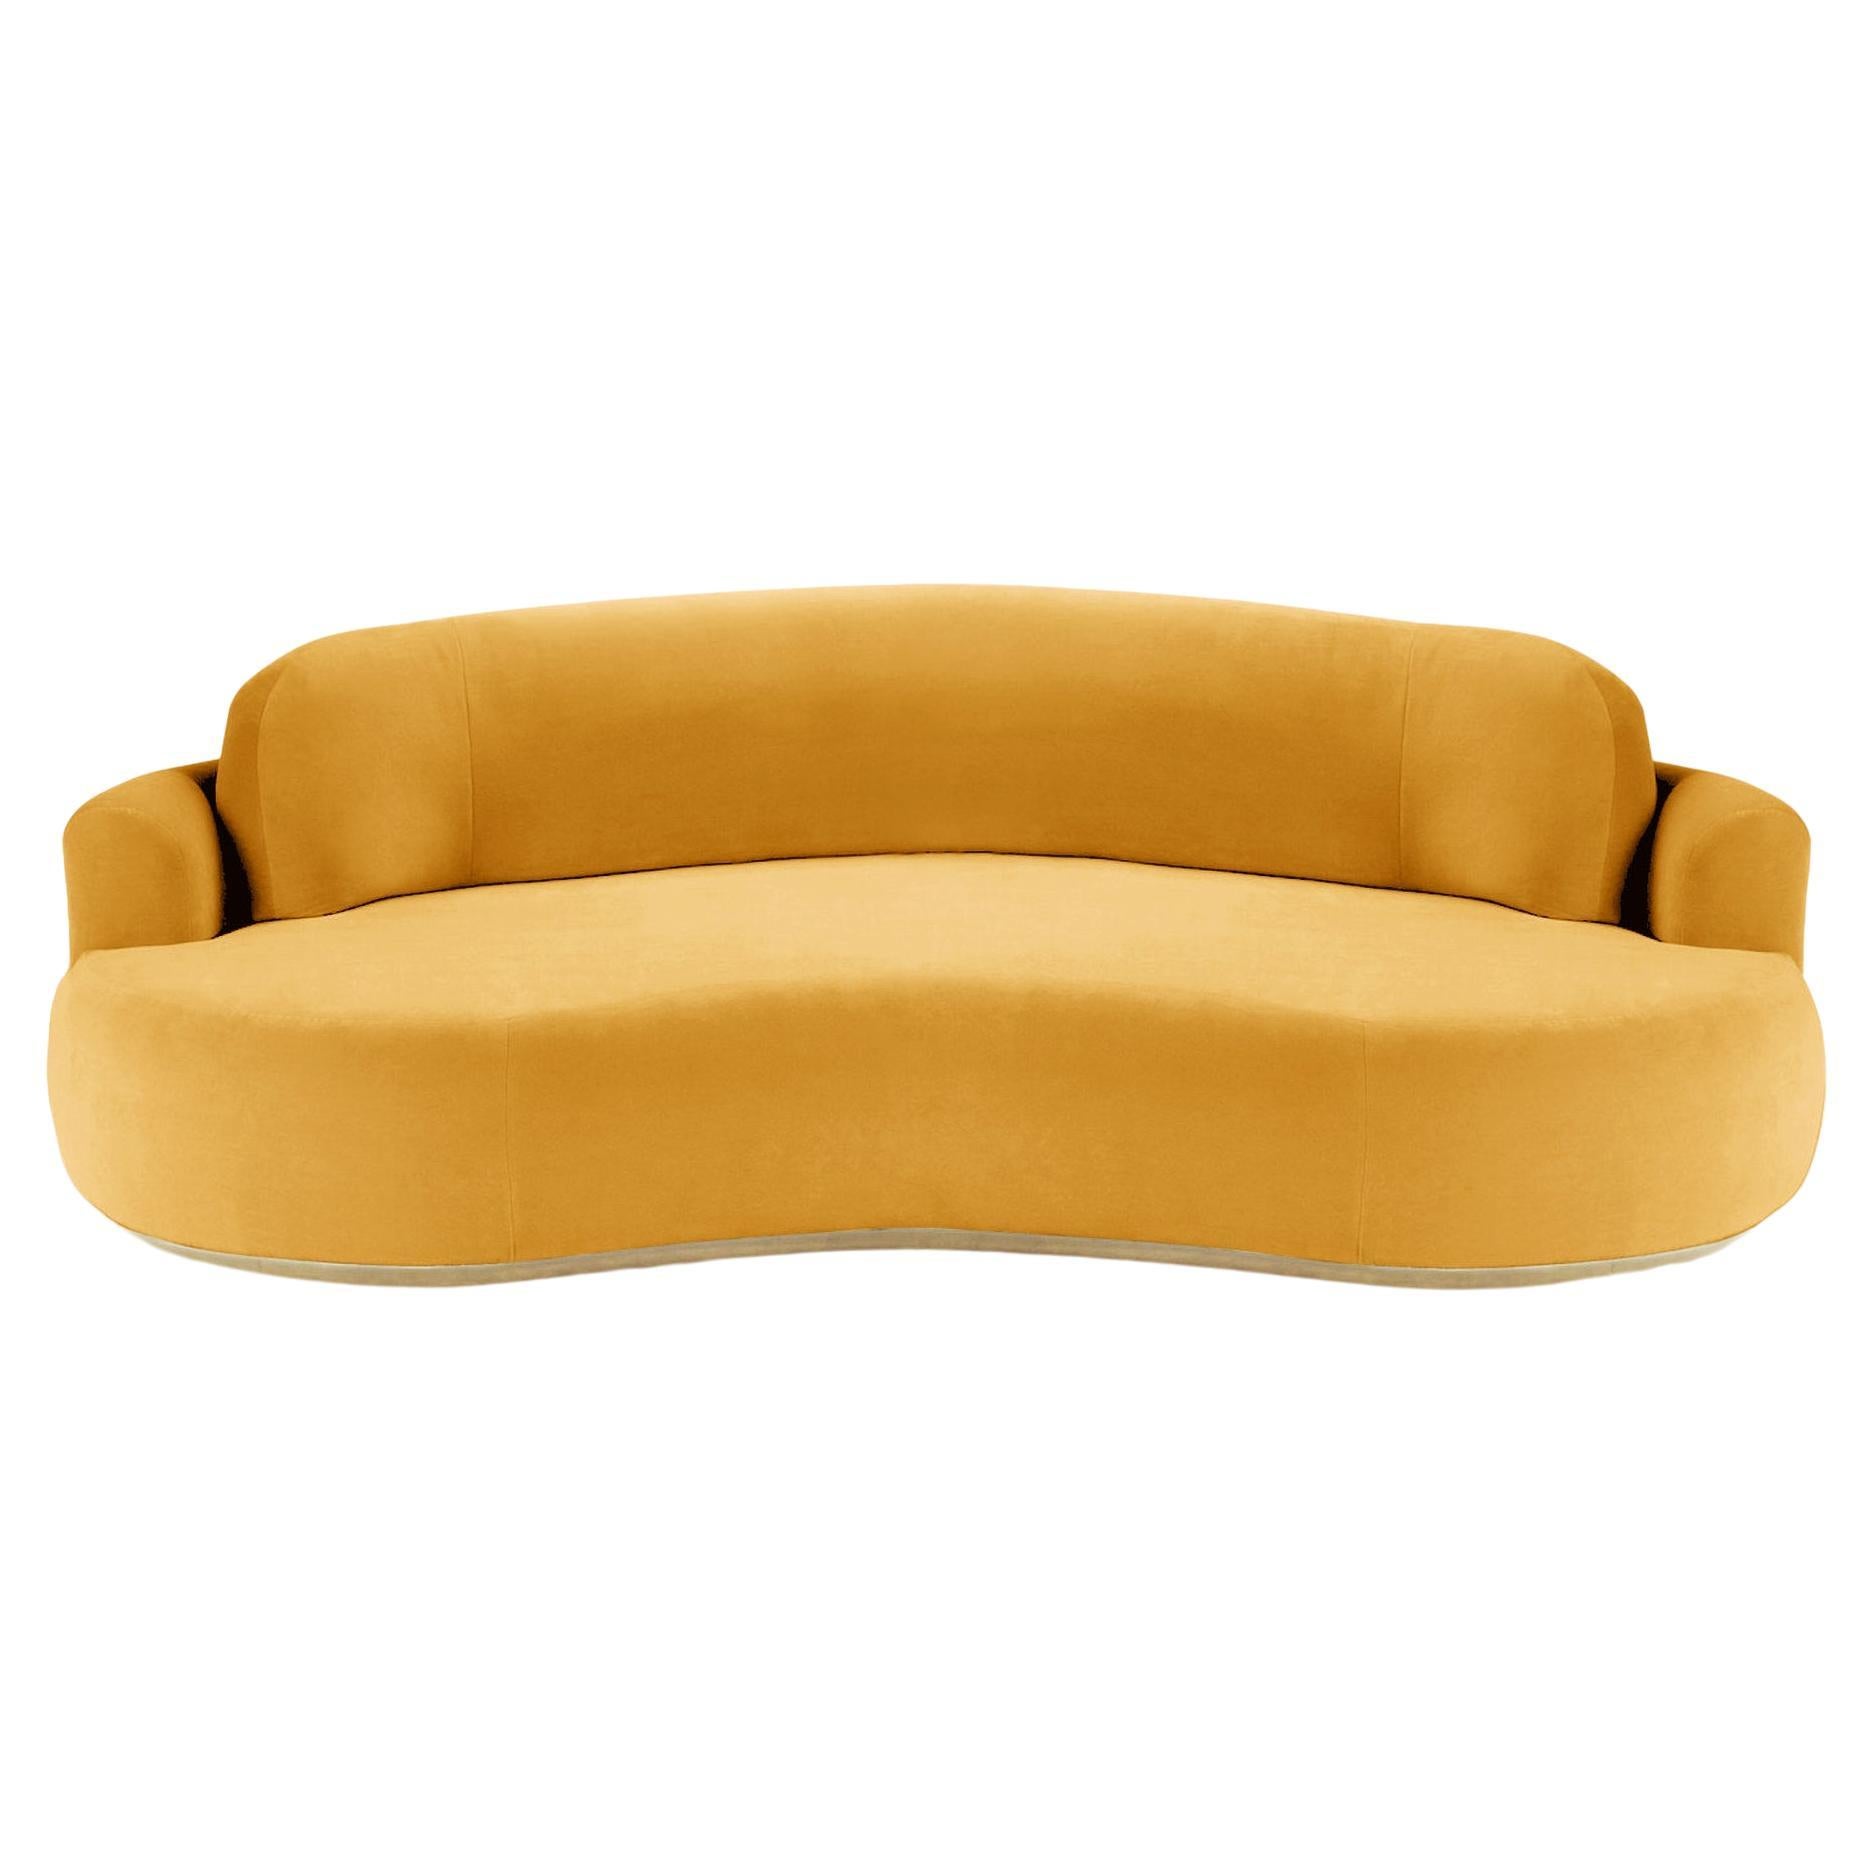 Naked Curved Sofa, Small with Natural Oak and Corn For Sale